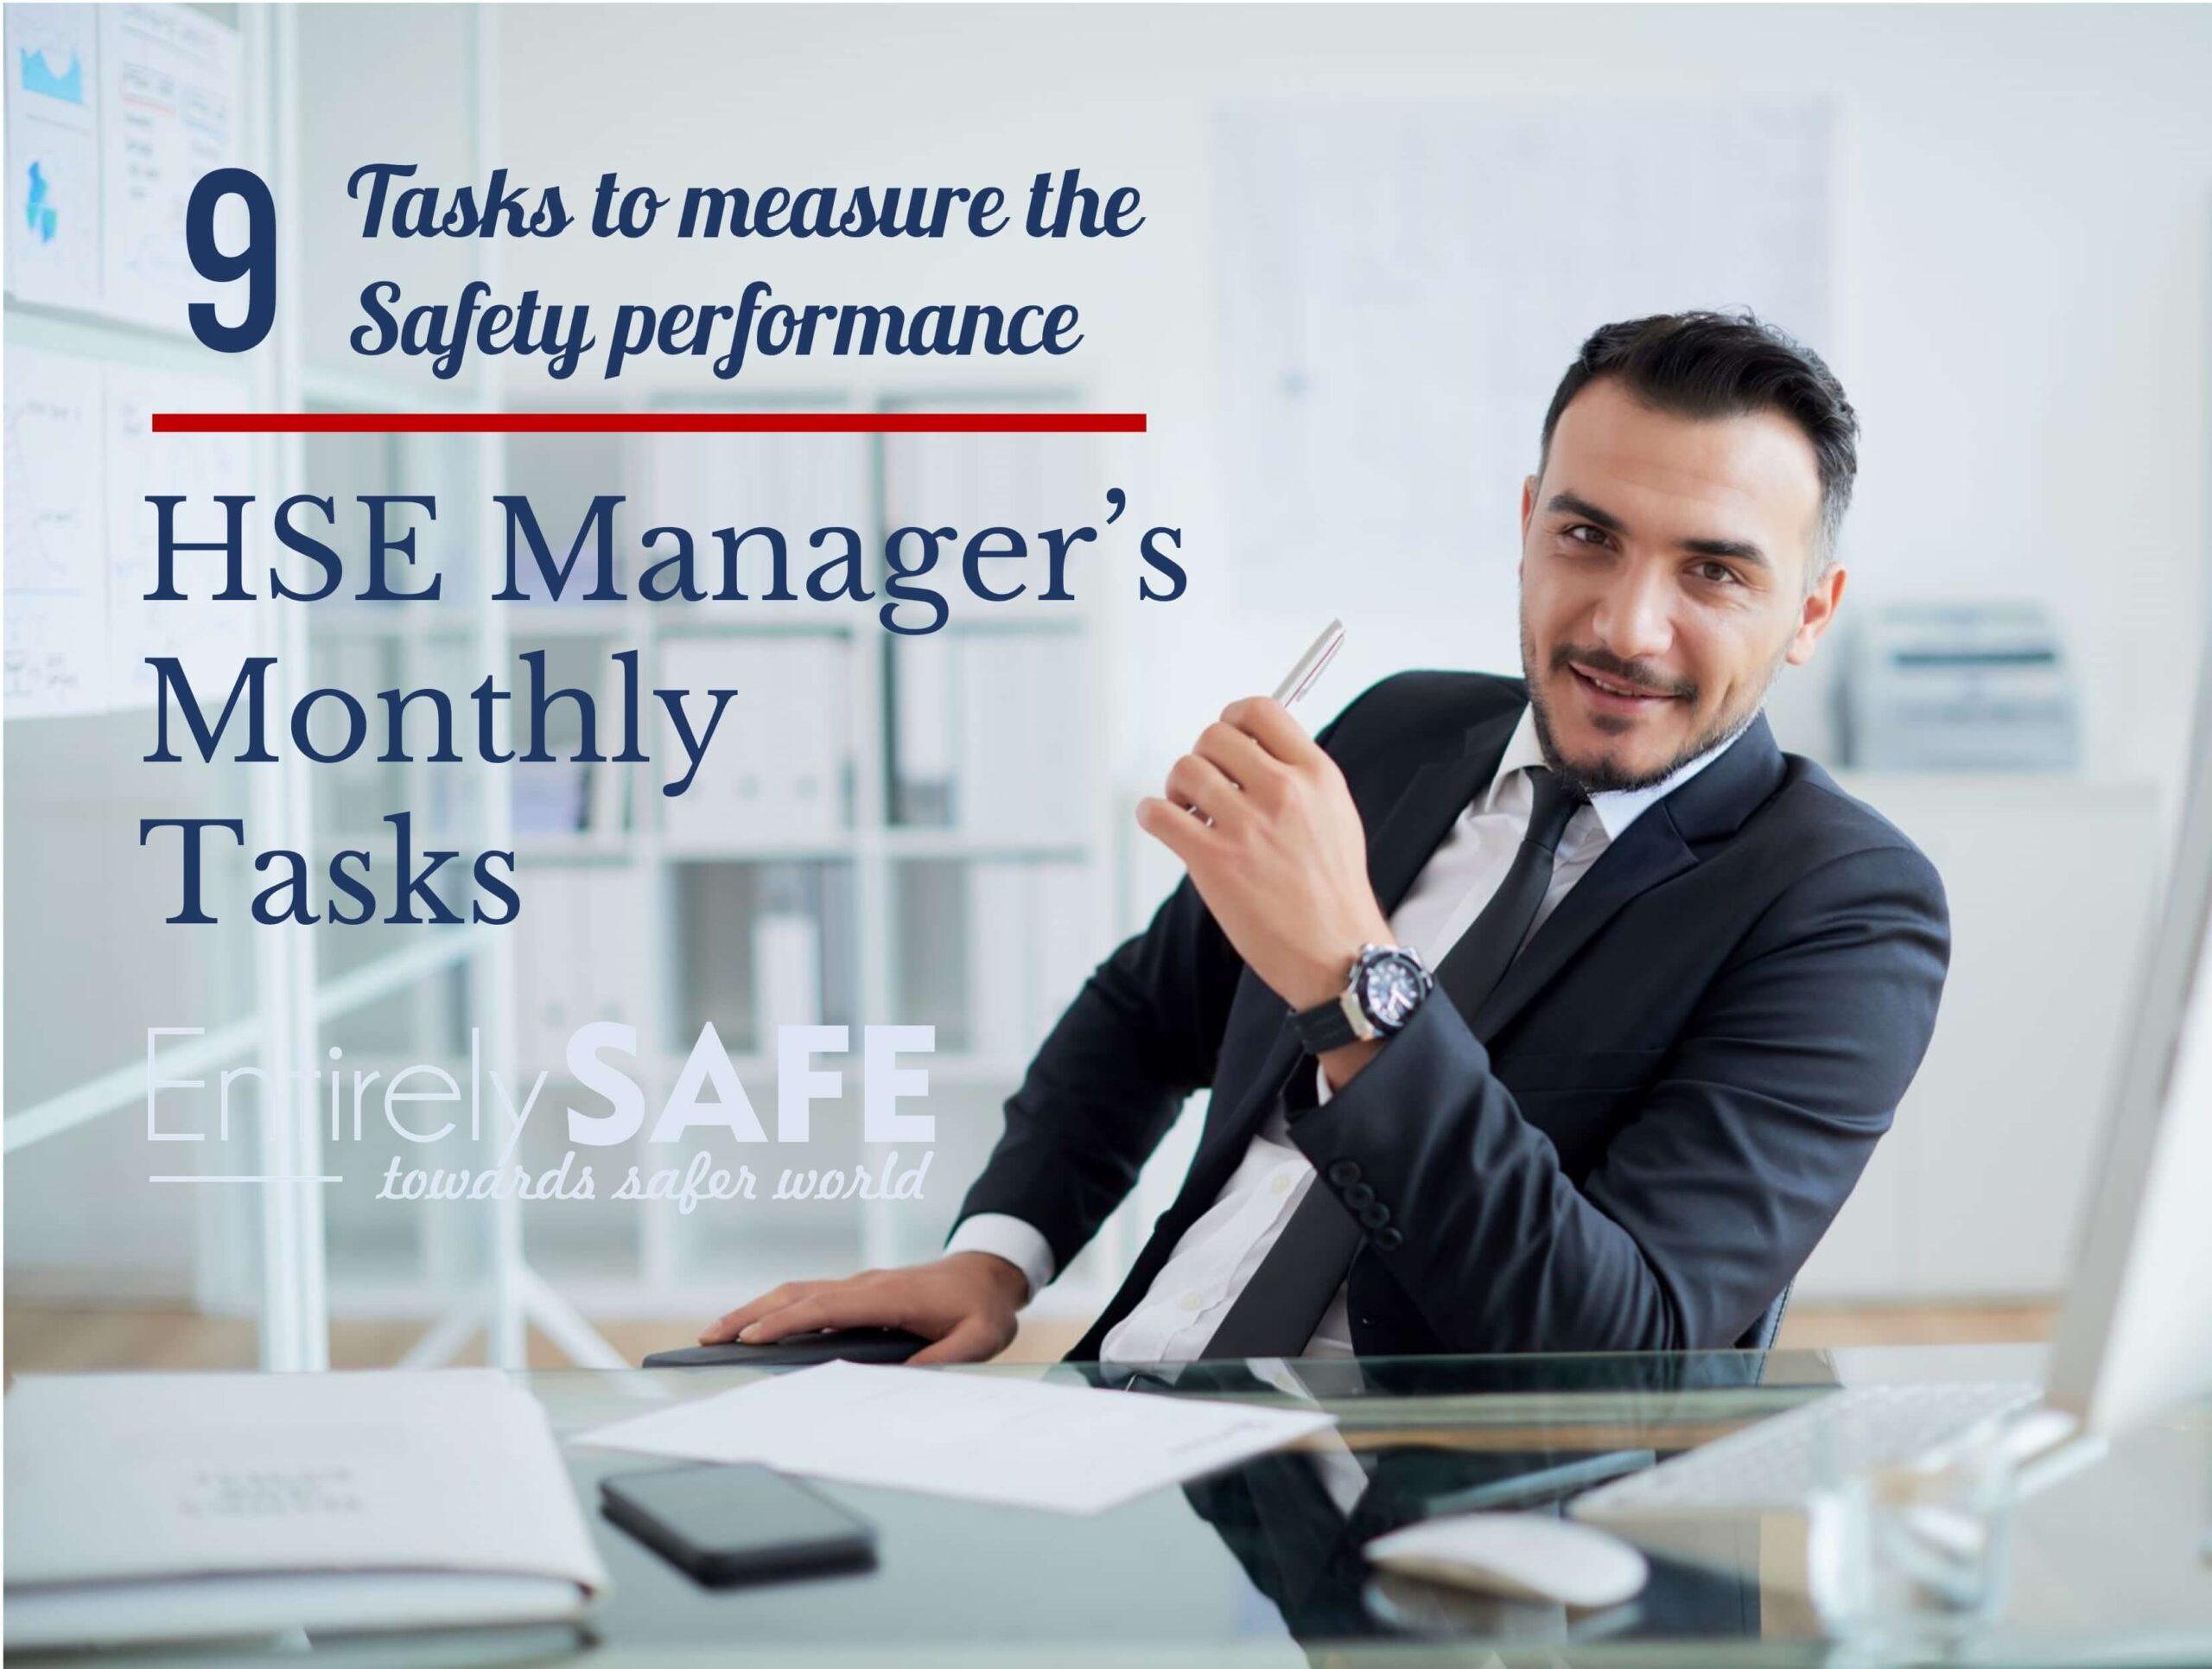 HSE-manager-Monthly-tasks (1)